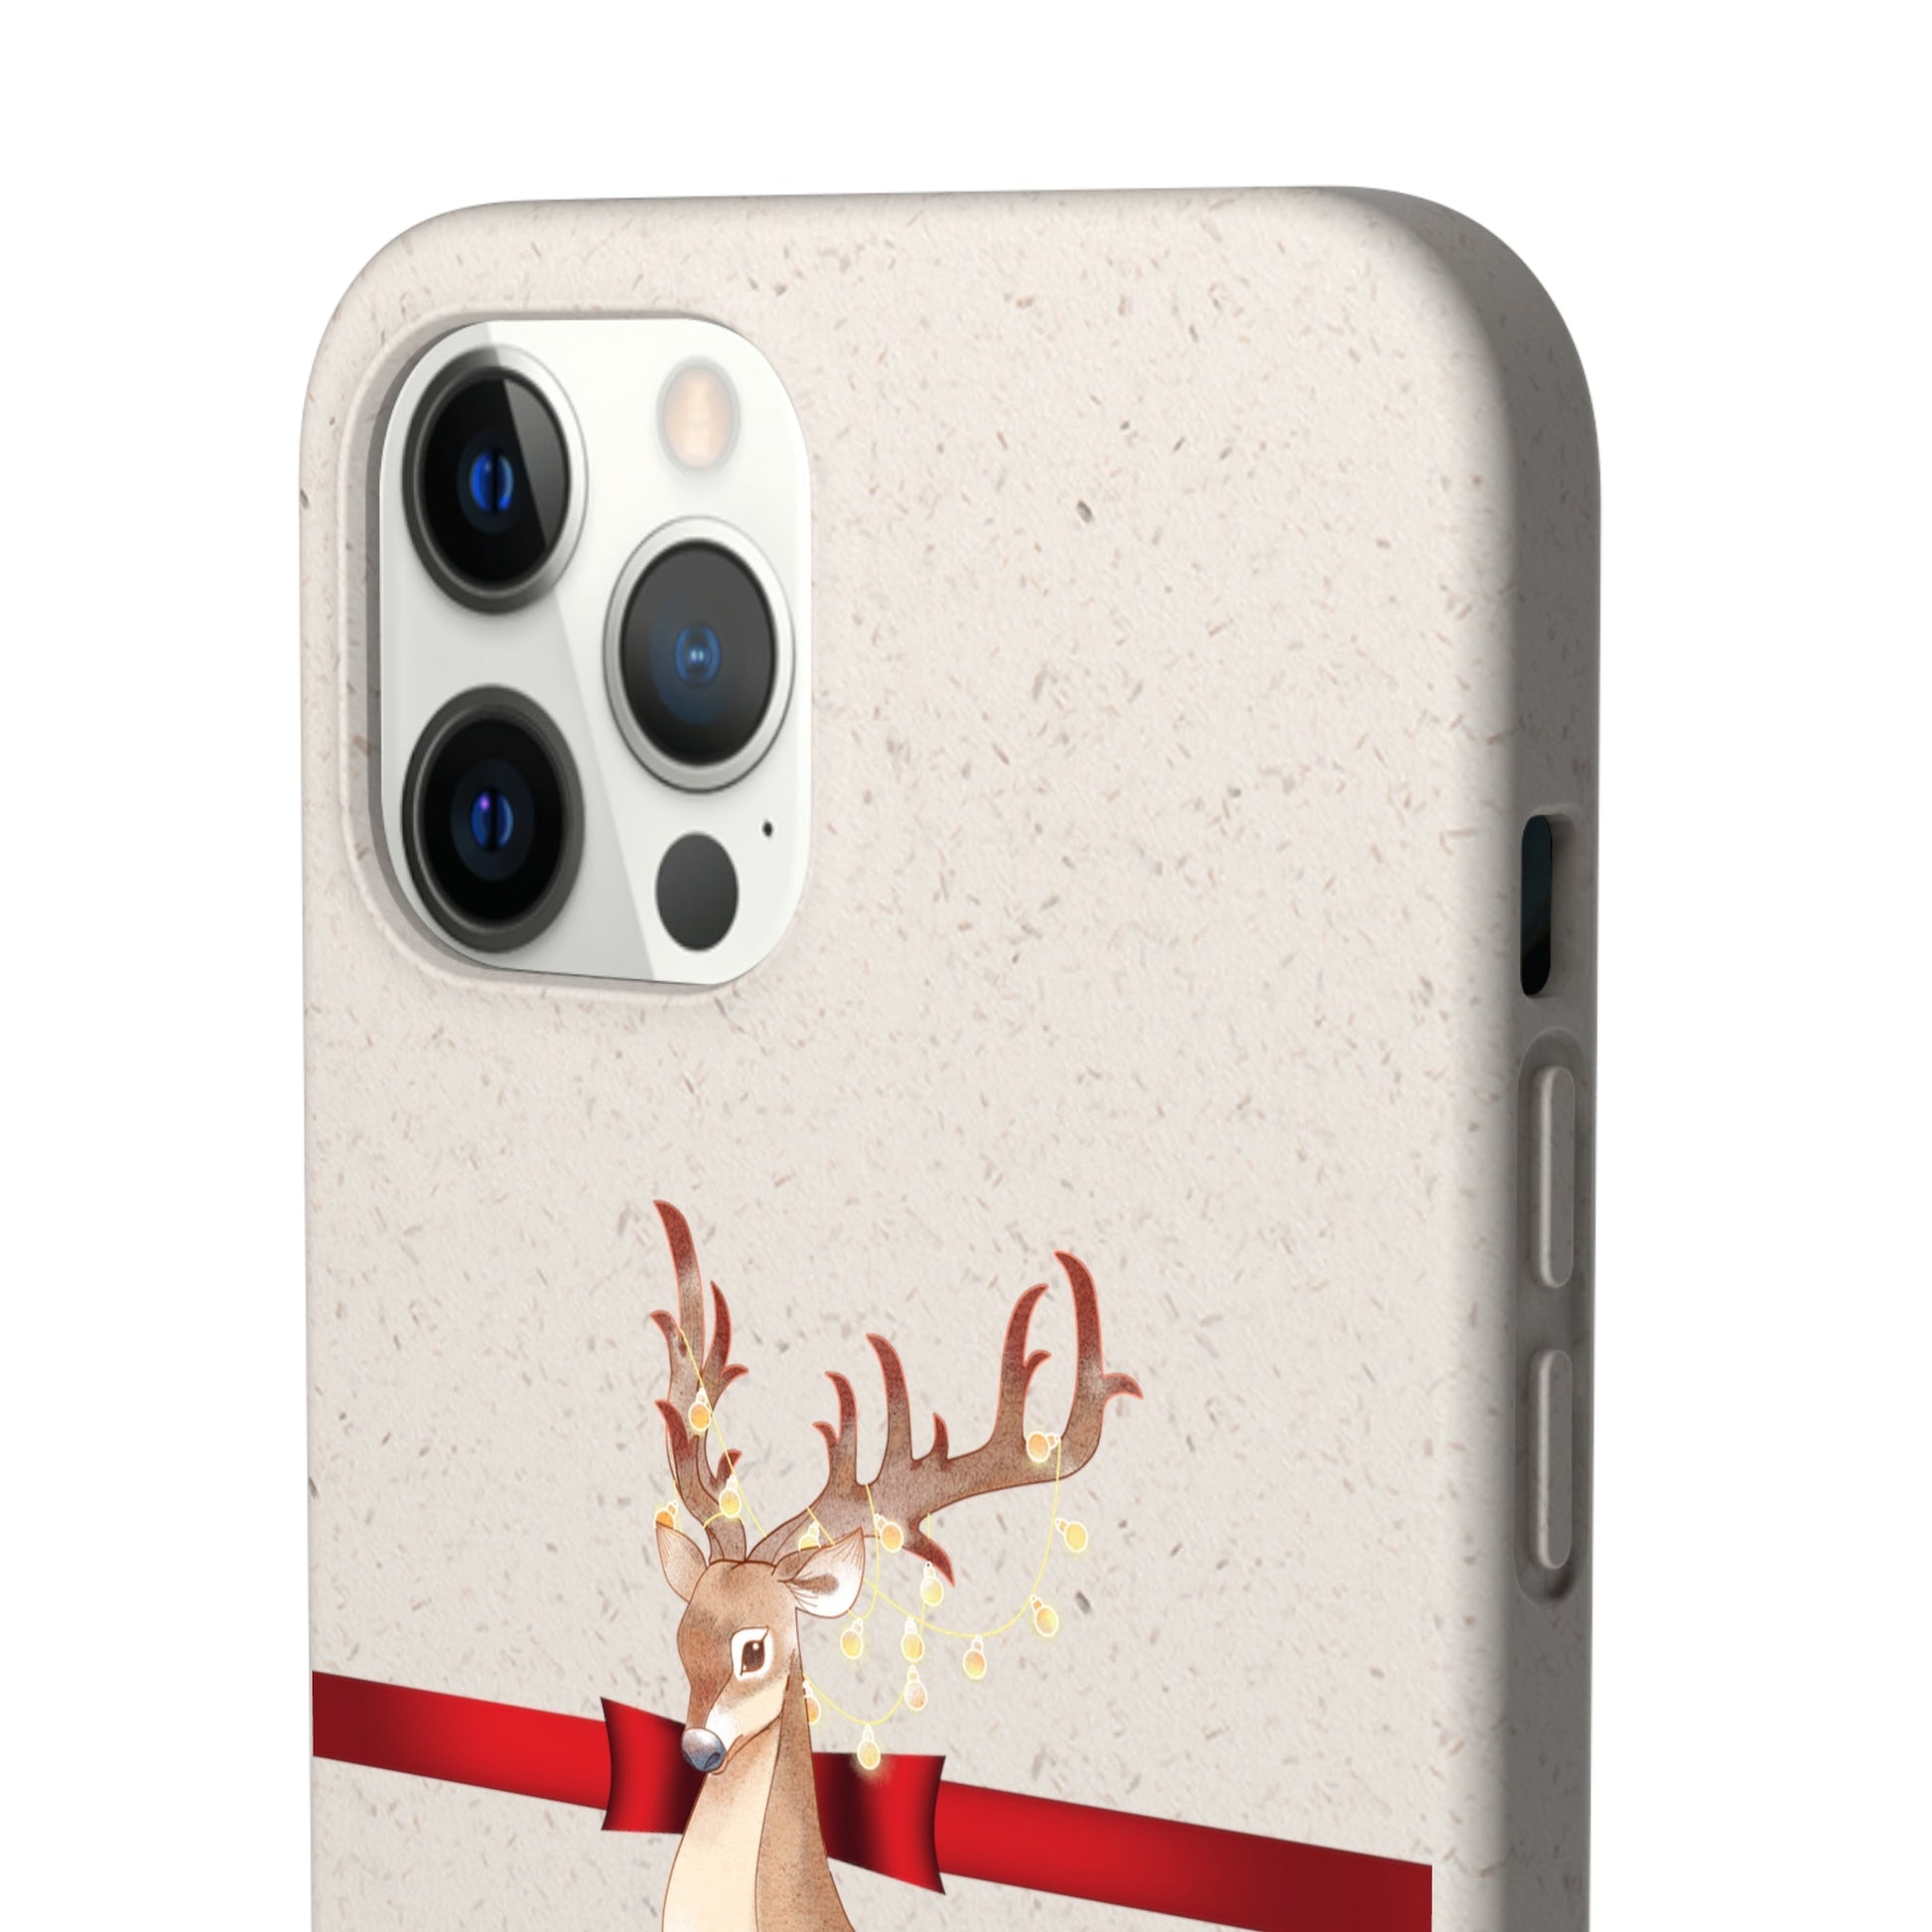 Christmas Biodegradable Case with Deer - Classy Cases - Phone Case - iPhone 12 Pro Max with gift packaging - -